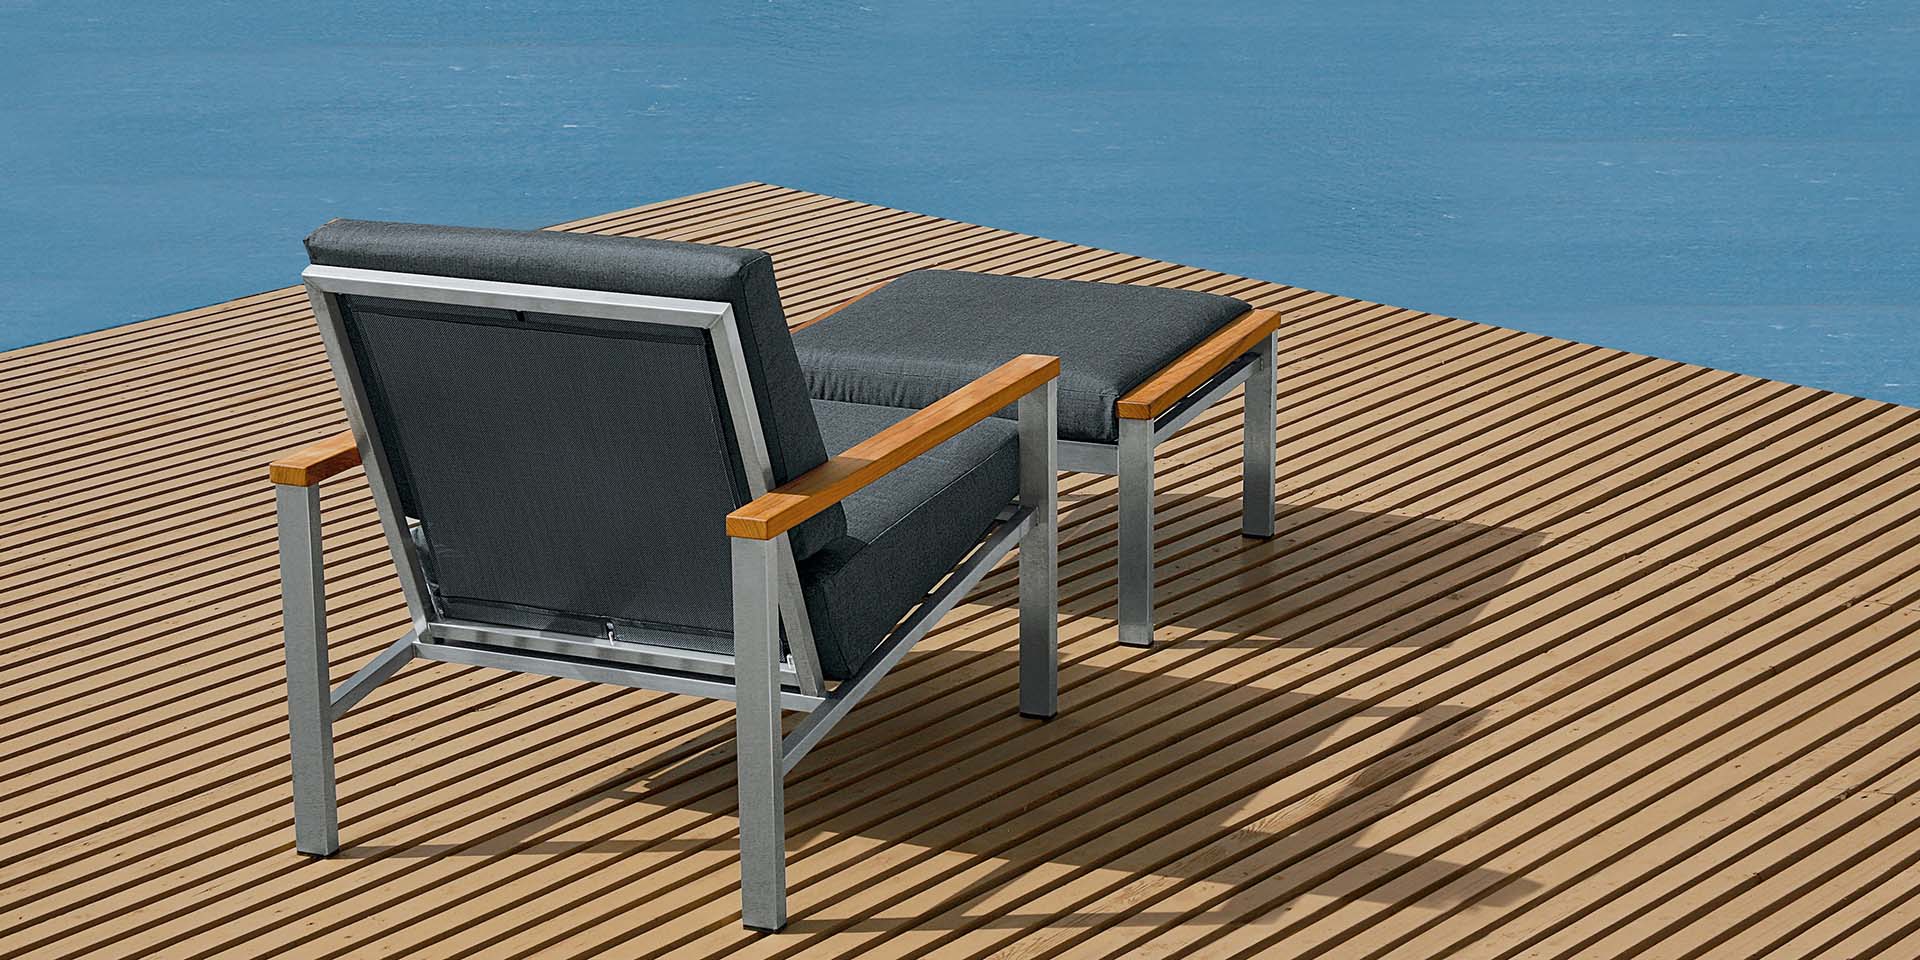 Equinox Occasional Deep Seating Armchair - Powder coated